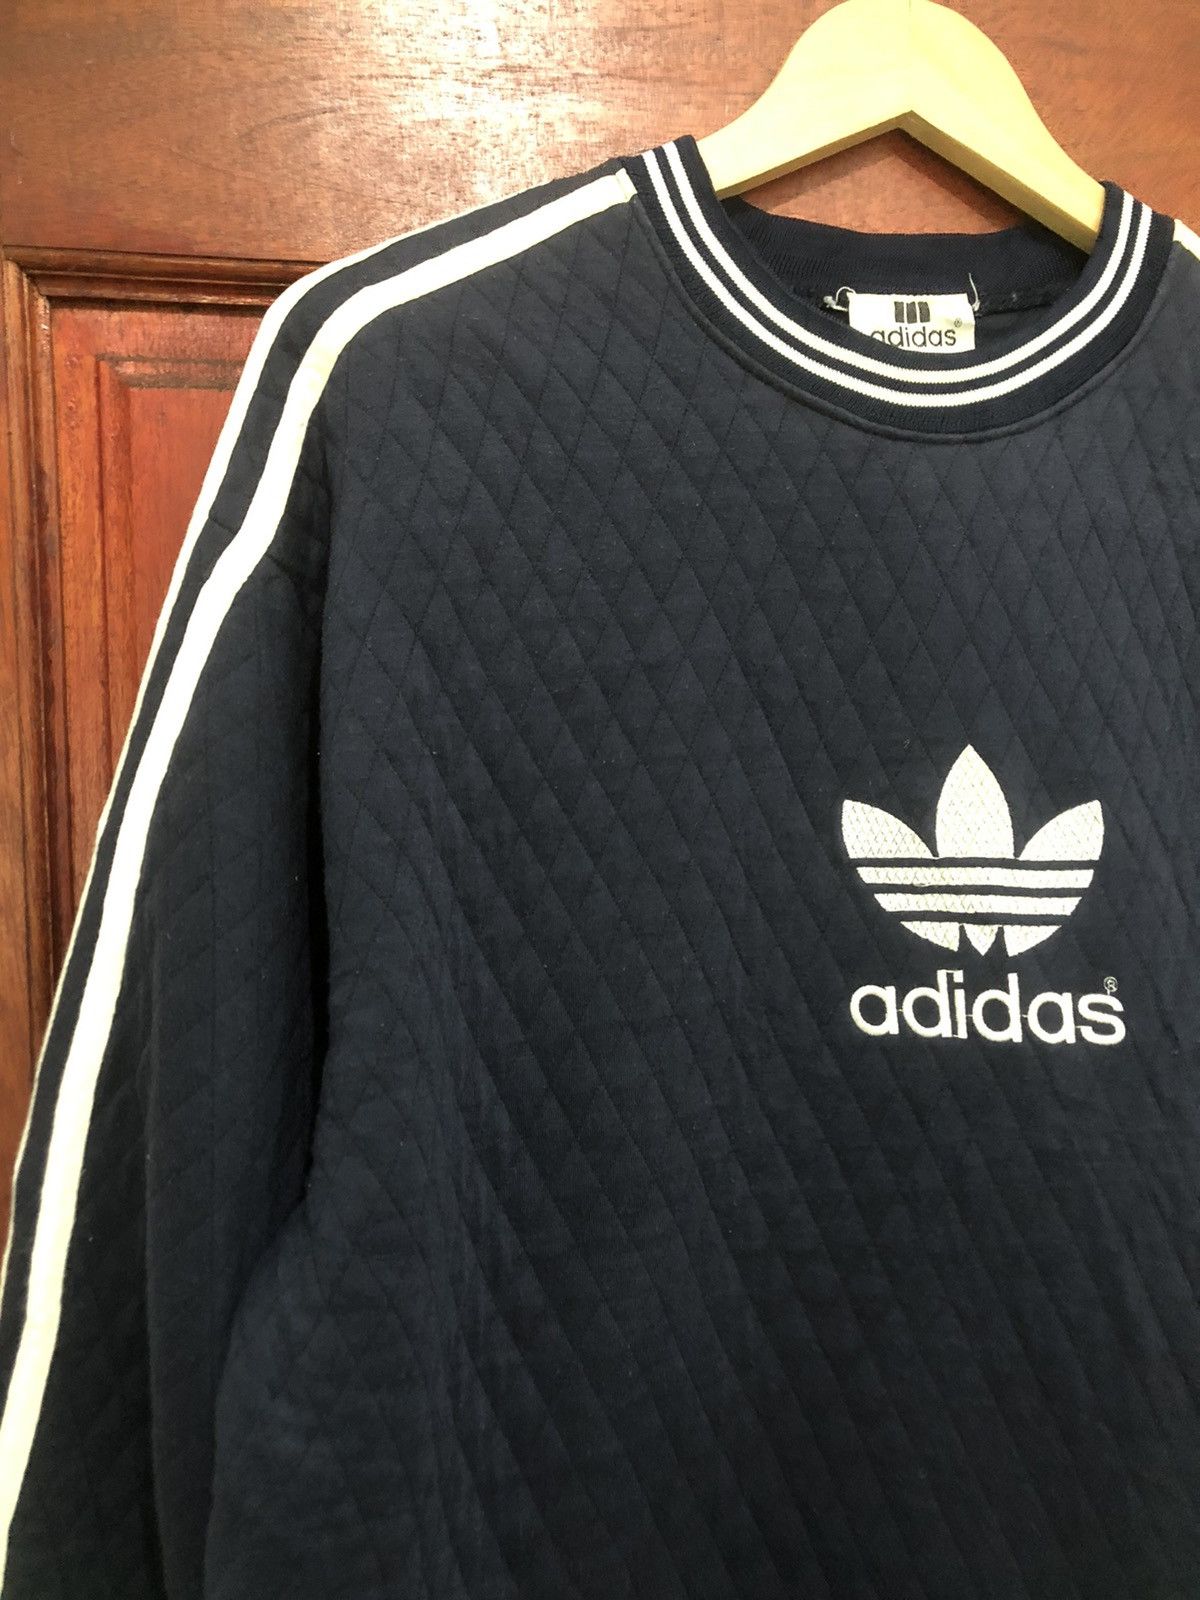 Vintage Adidas Quilted Embroidery Trefoil Sweatshirt - 3